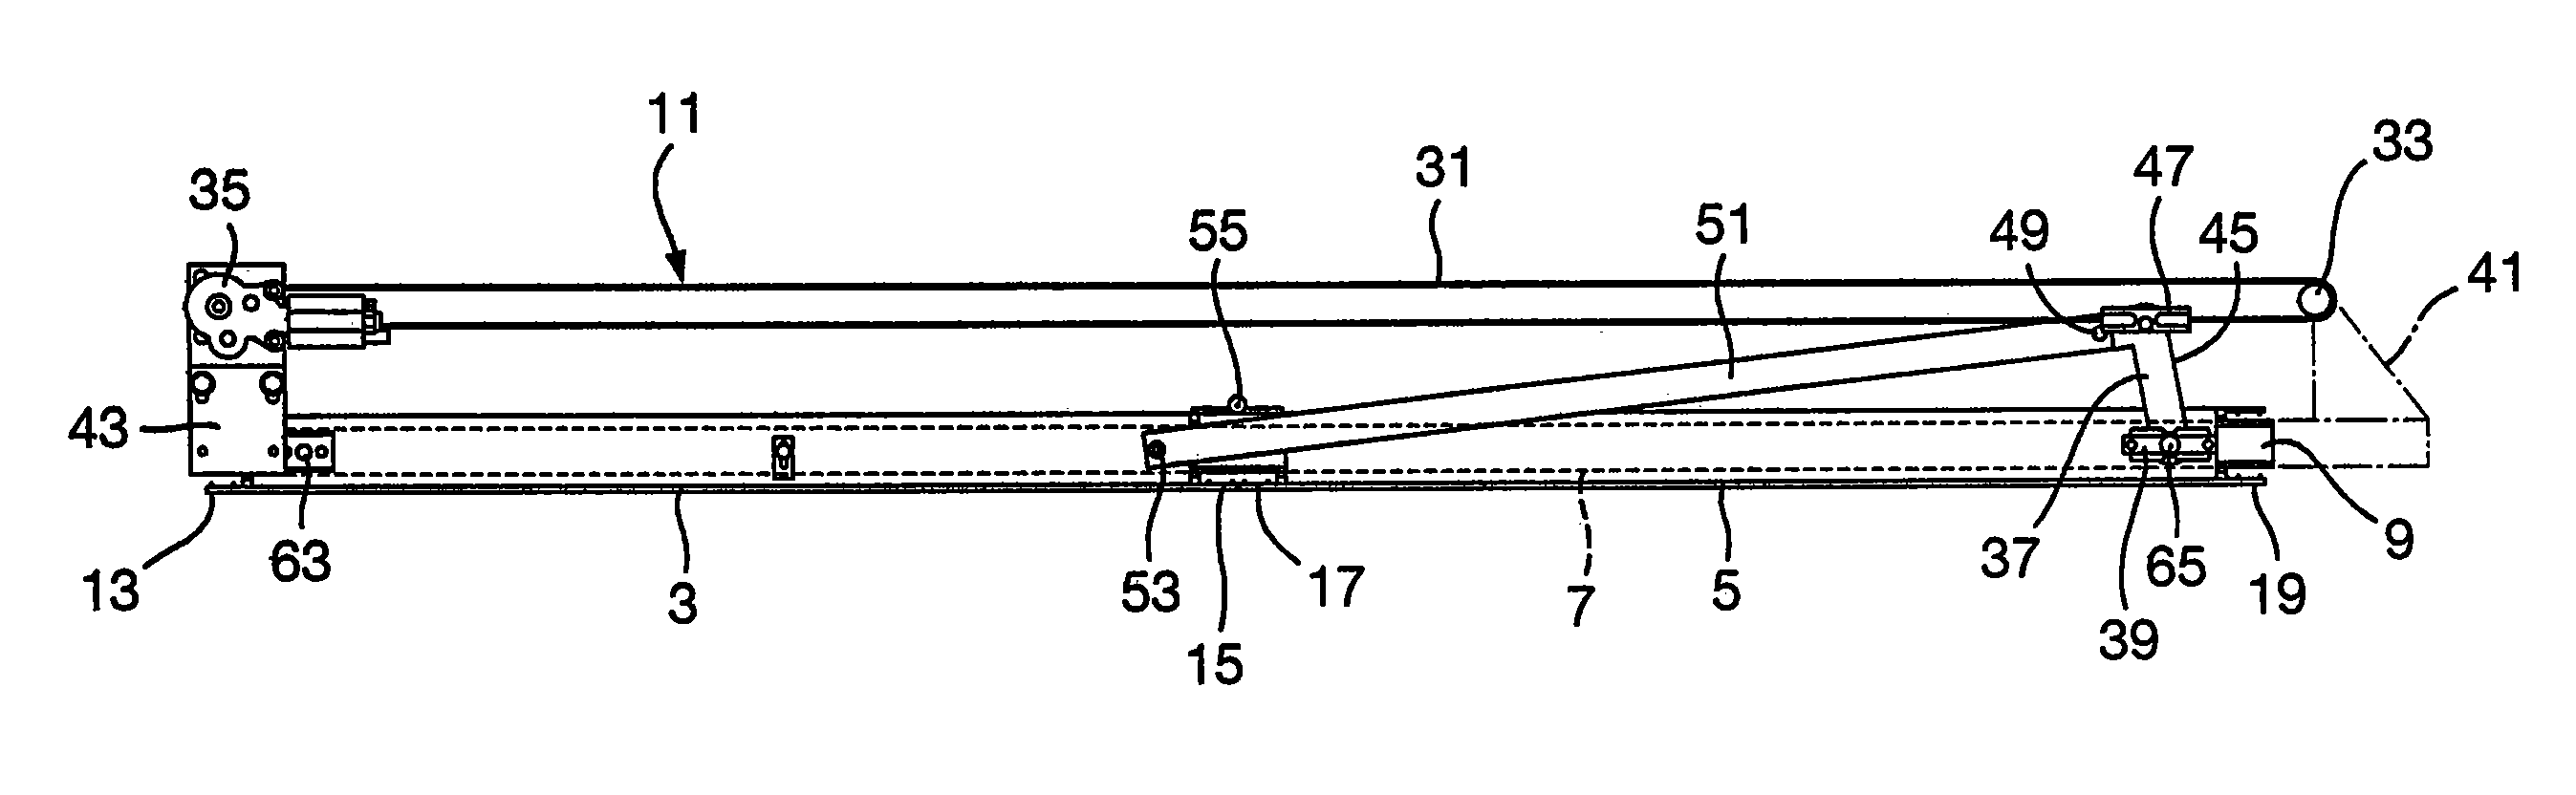 Actuating system and folding panel assembly